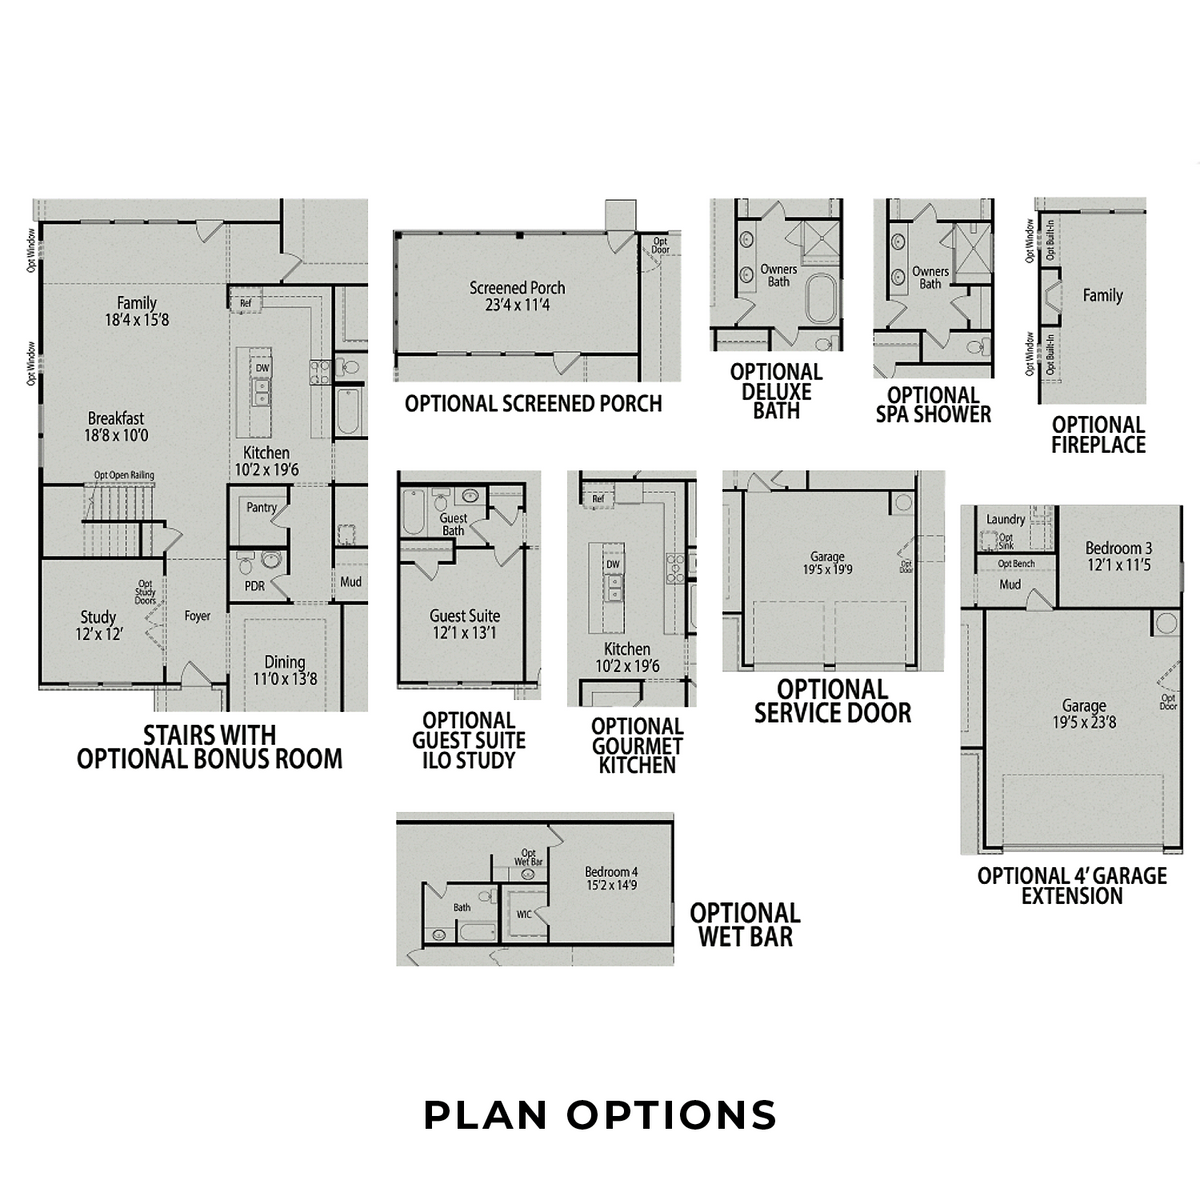 3 - The Magnolia B floor plan layout for 103 Golden Leaf Farms Road in Davidson Homes' Tobacco Road community.